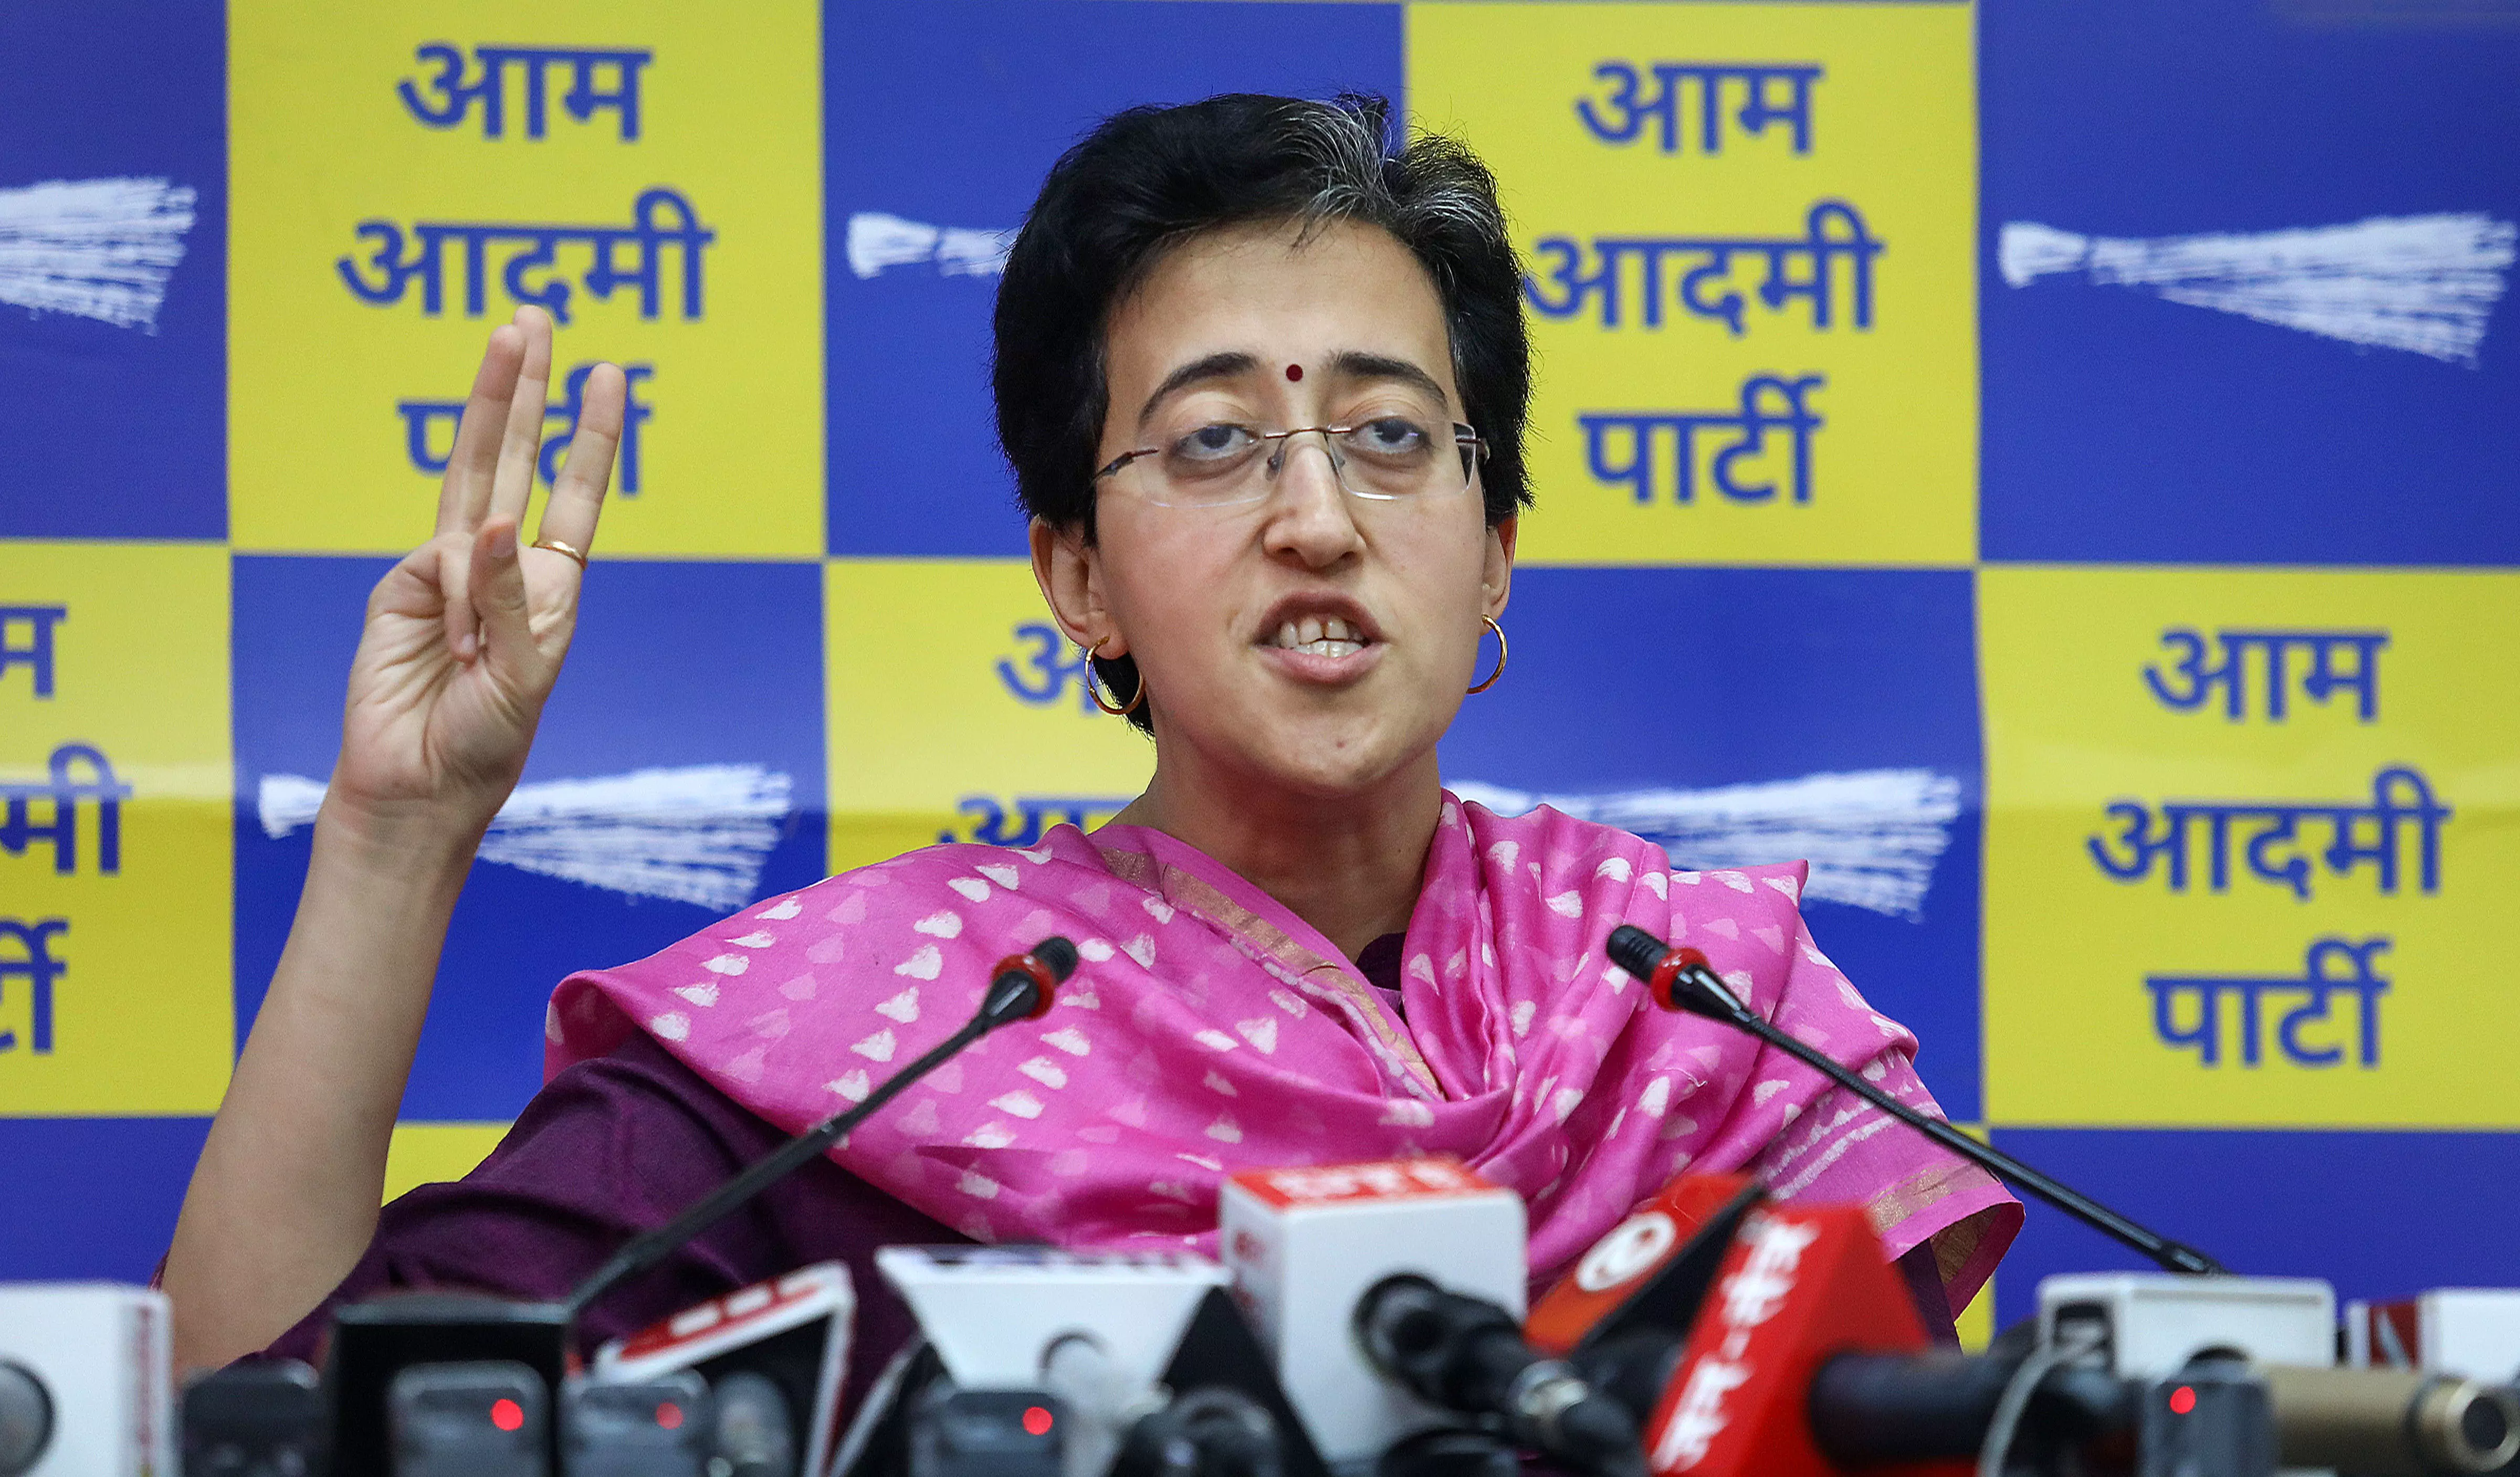 Told to join BJP or get arrested along with 3 other AAP leaders: Atishi